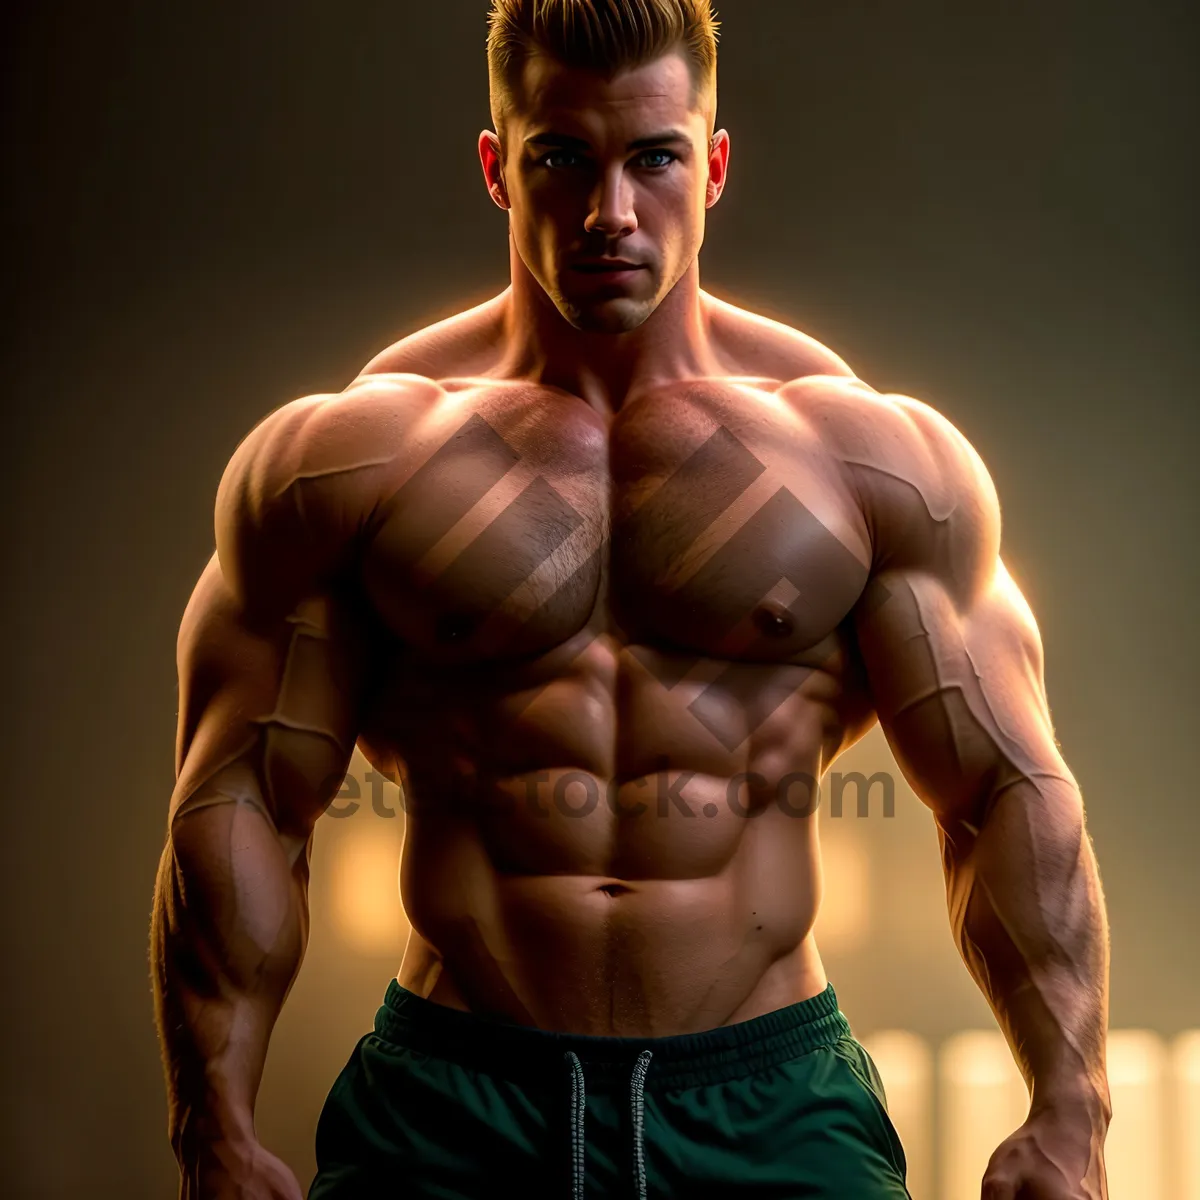 Picture of Muscular male bodybuilder showcasing ripped physique in gym